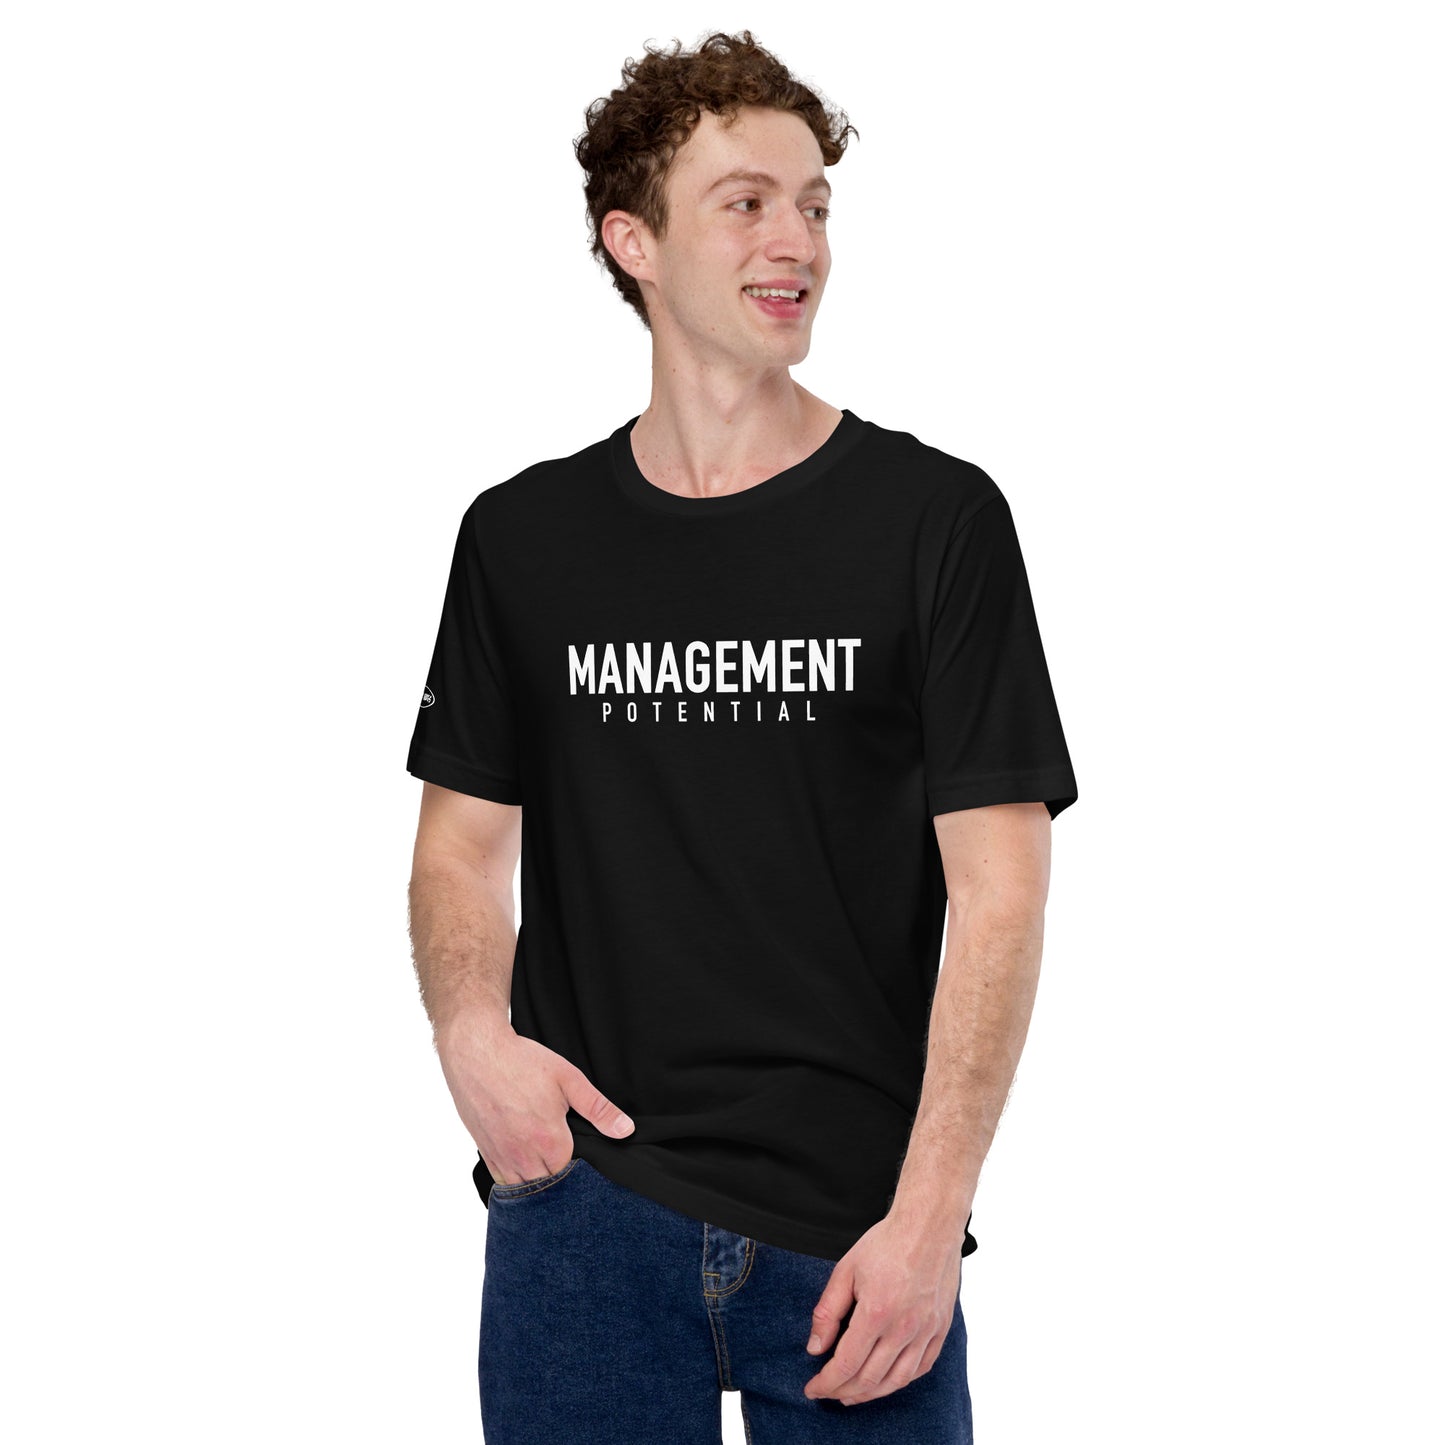 Management Potential - Funny T-Shirt